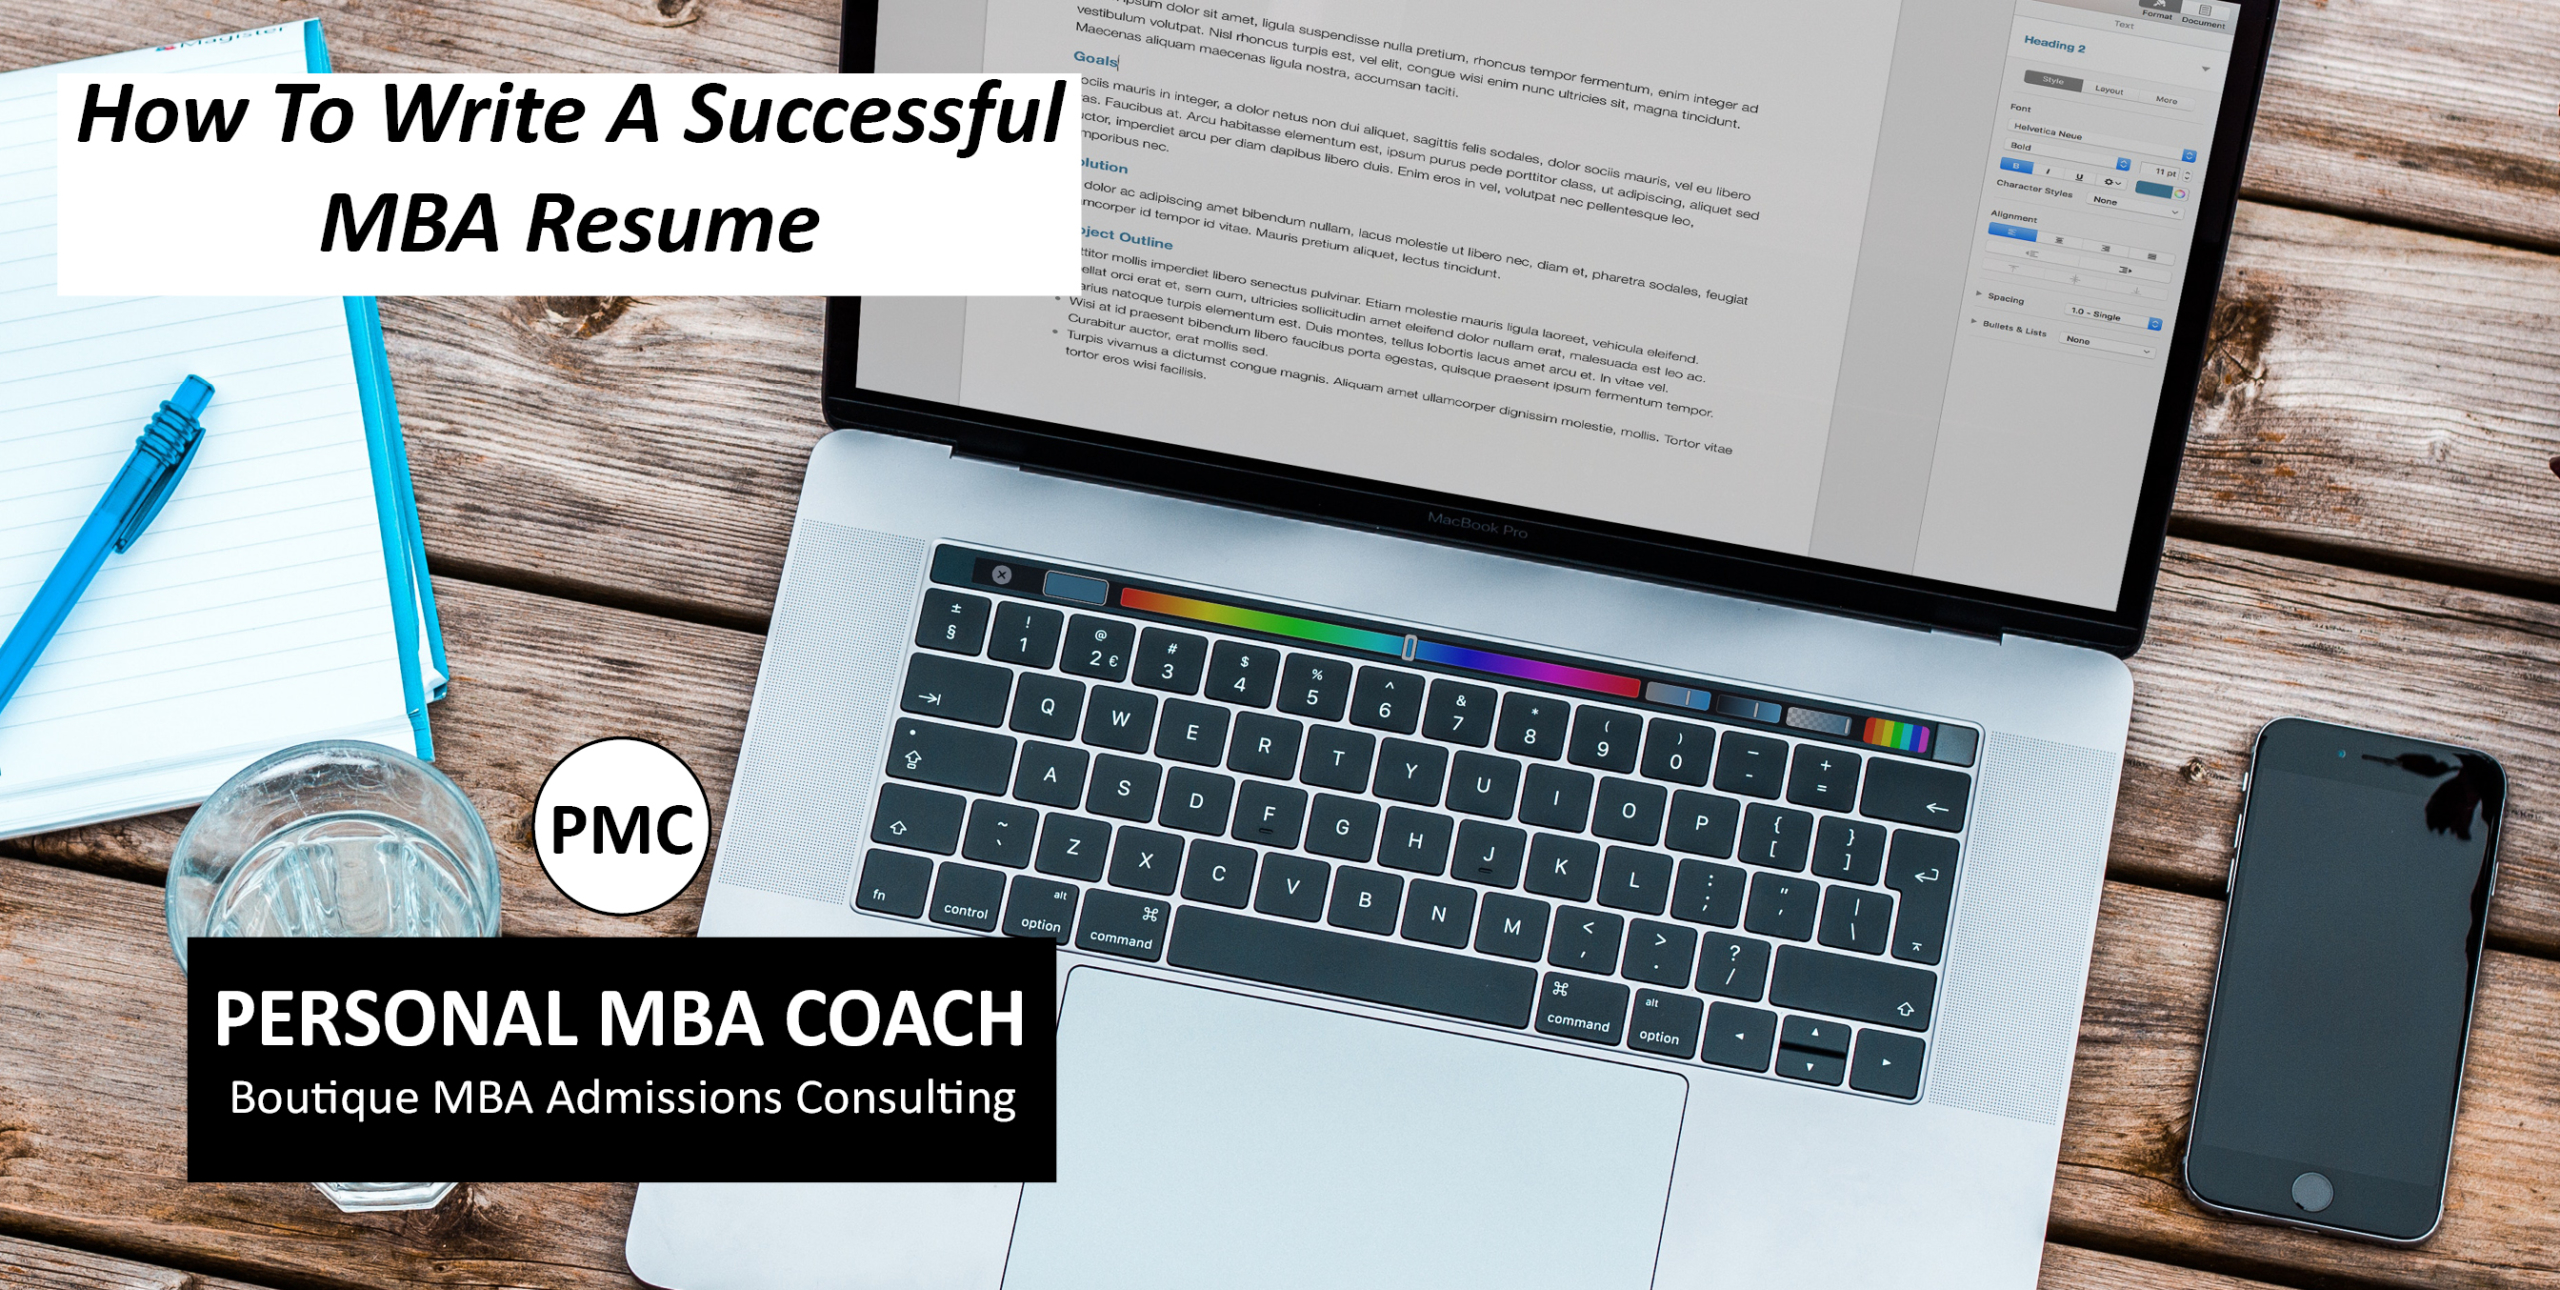 Permalink to: "Personal MBA Coach’s Tips On Writing A Successful MBA Resume"